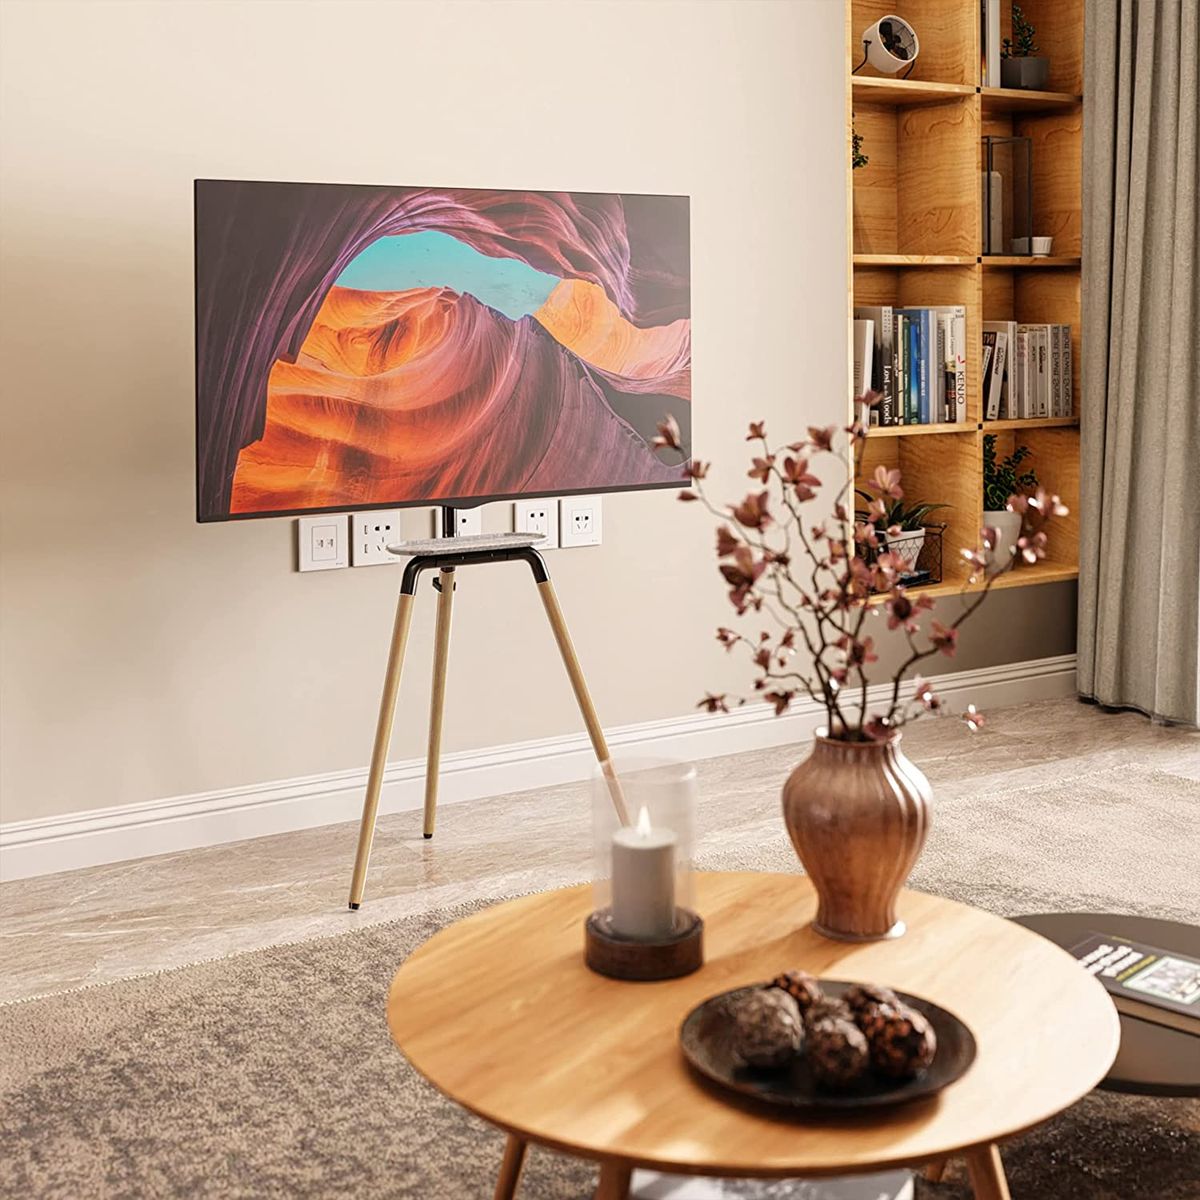 Turn Your TV Into A Work Of Art With These Easel TV Stands!